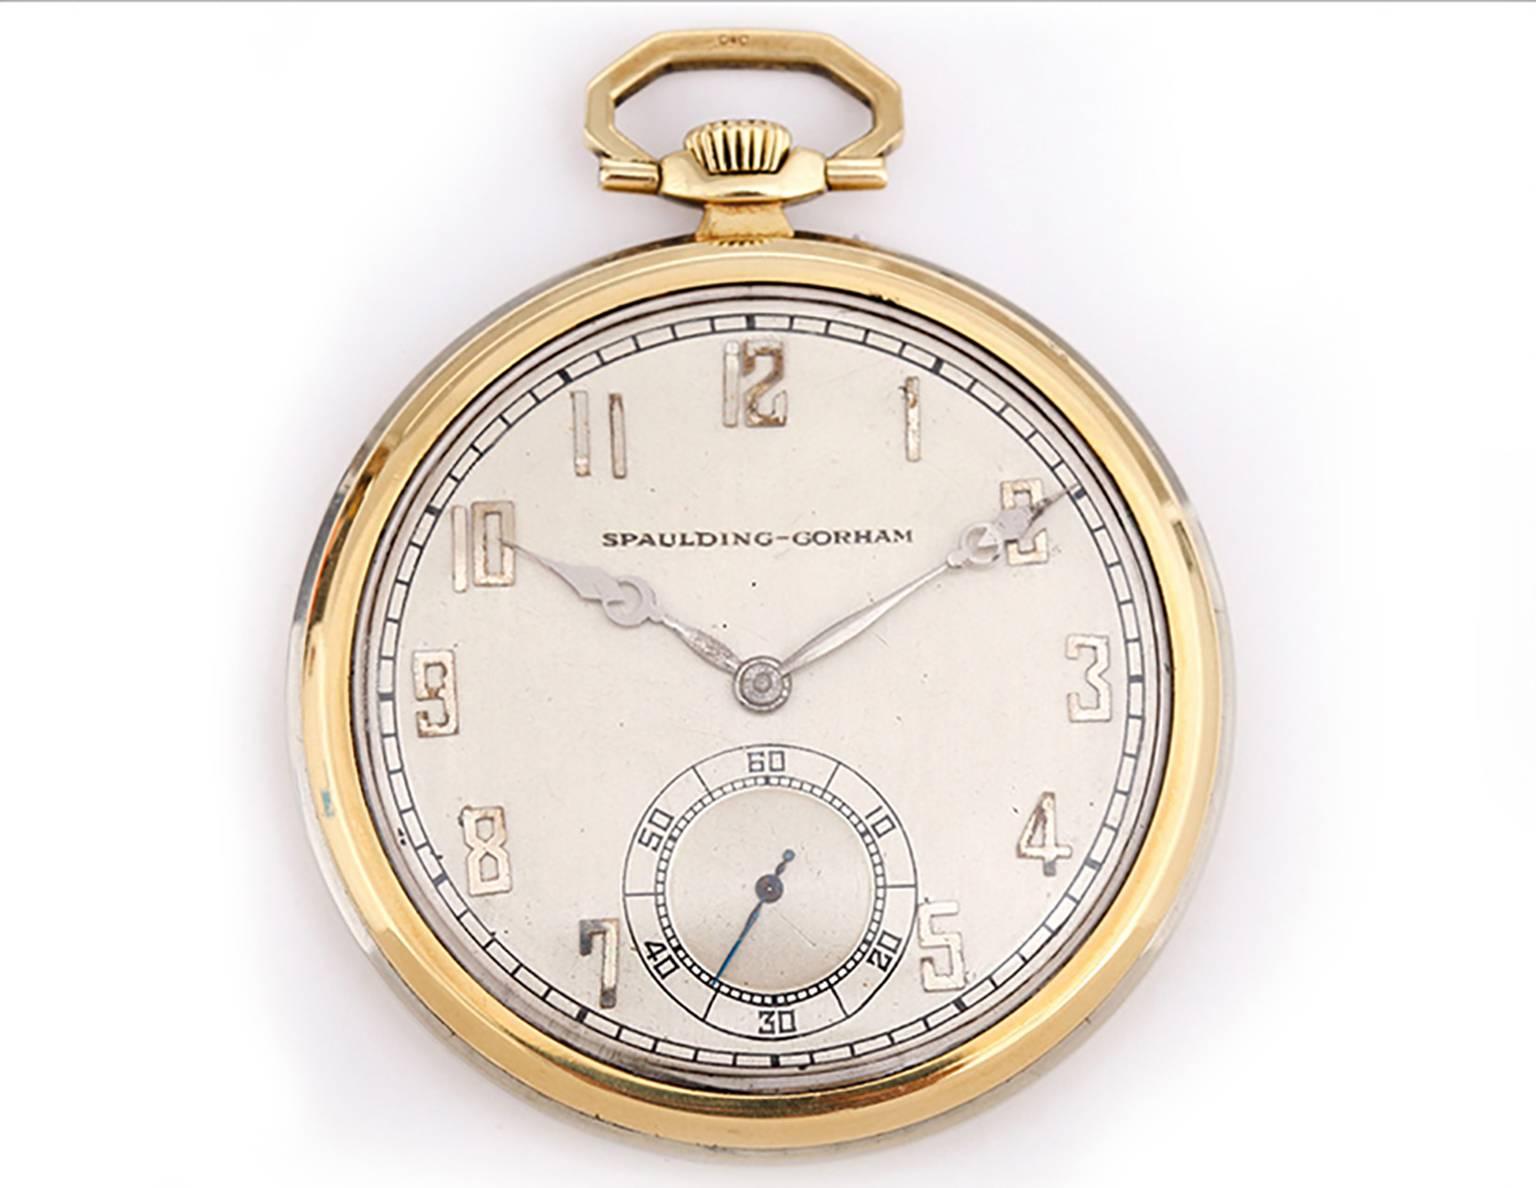 Longines Pocket Watch for Spaulding & Gorham -  Manual winding. Art Deco style 2-Tone 18k white & yellow gold 12 size (45mm diameter). The case back as well as the 14k gold case of the pocket watch are both engraved with the initials WJH. Silver